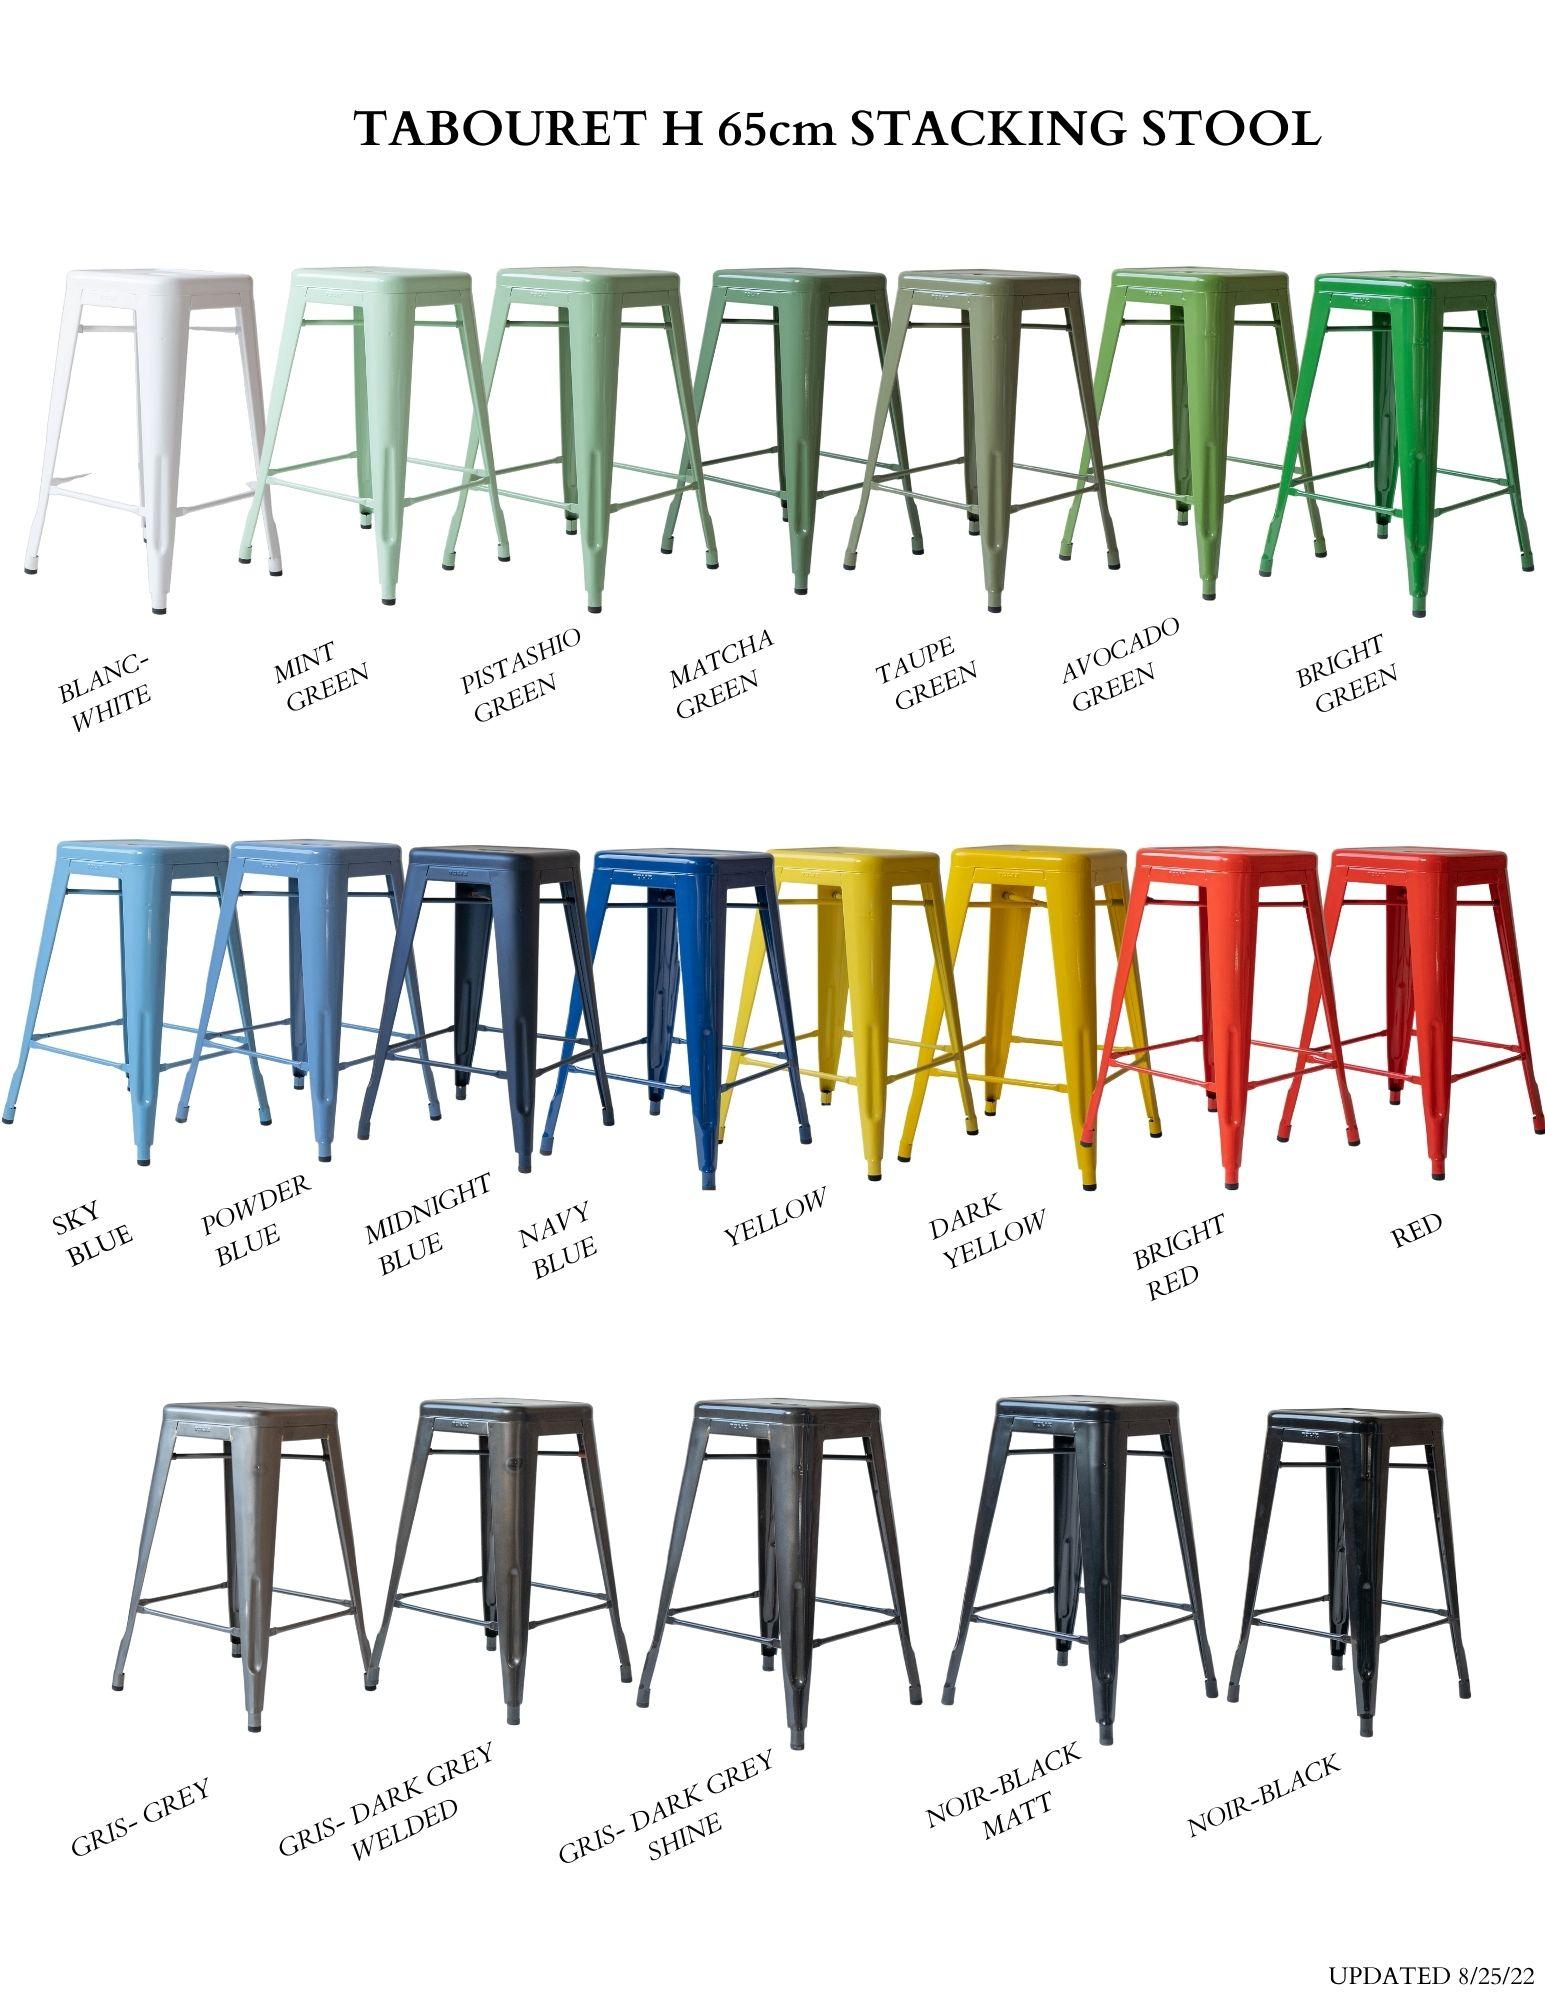 Genuine French Tolix Set of '4' Steel Stacking Stools Hundreds More in Stock 3